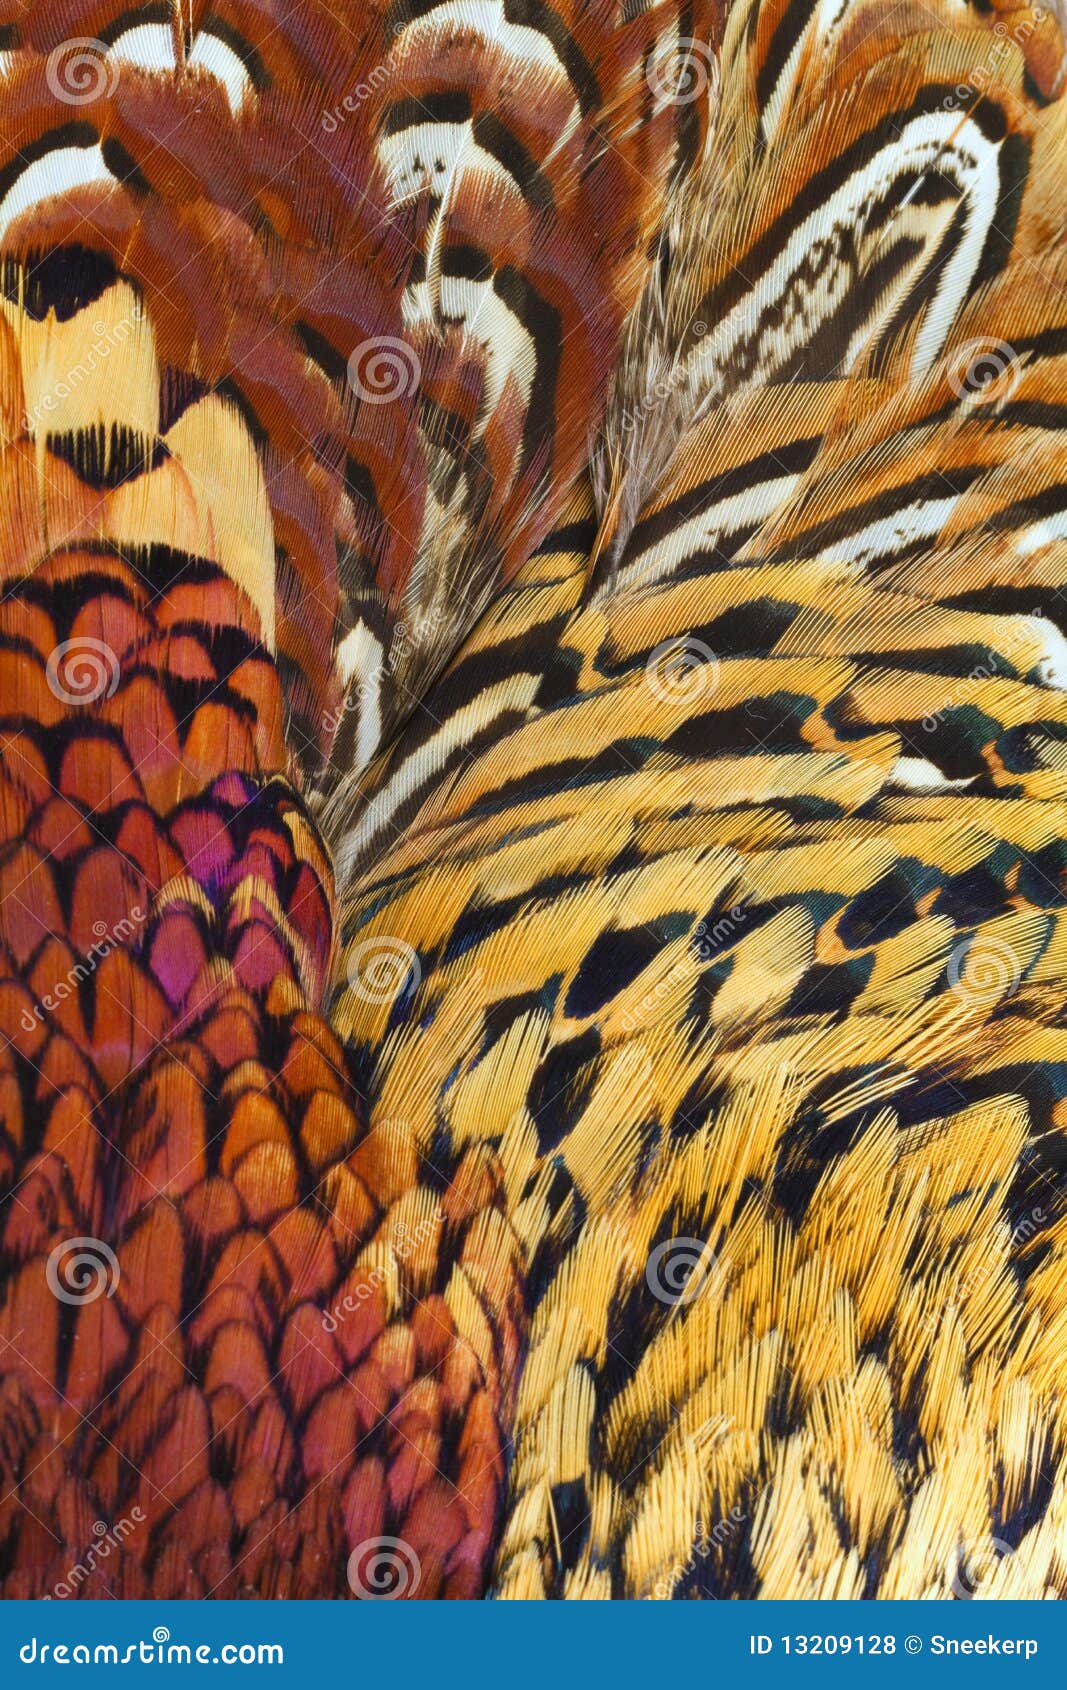 abstract background consisting of rigneck pheasant